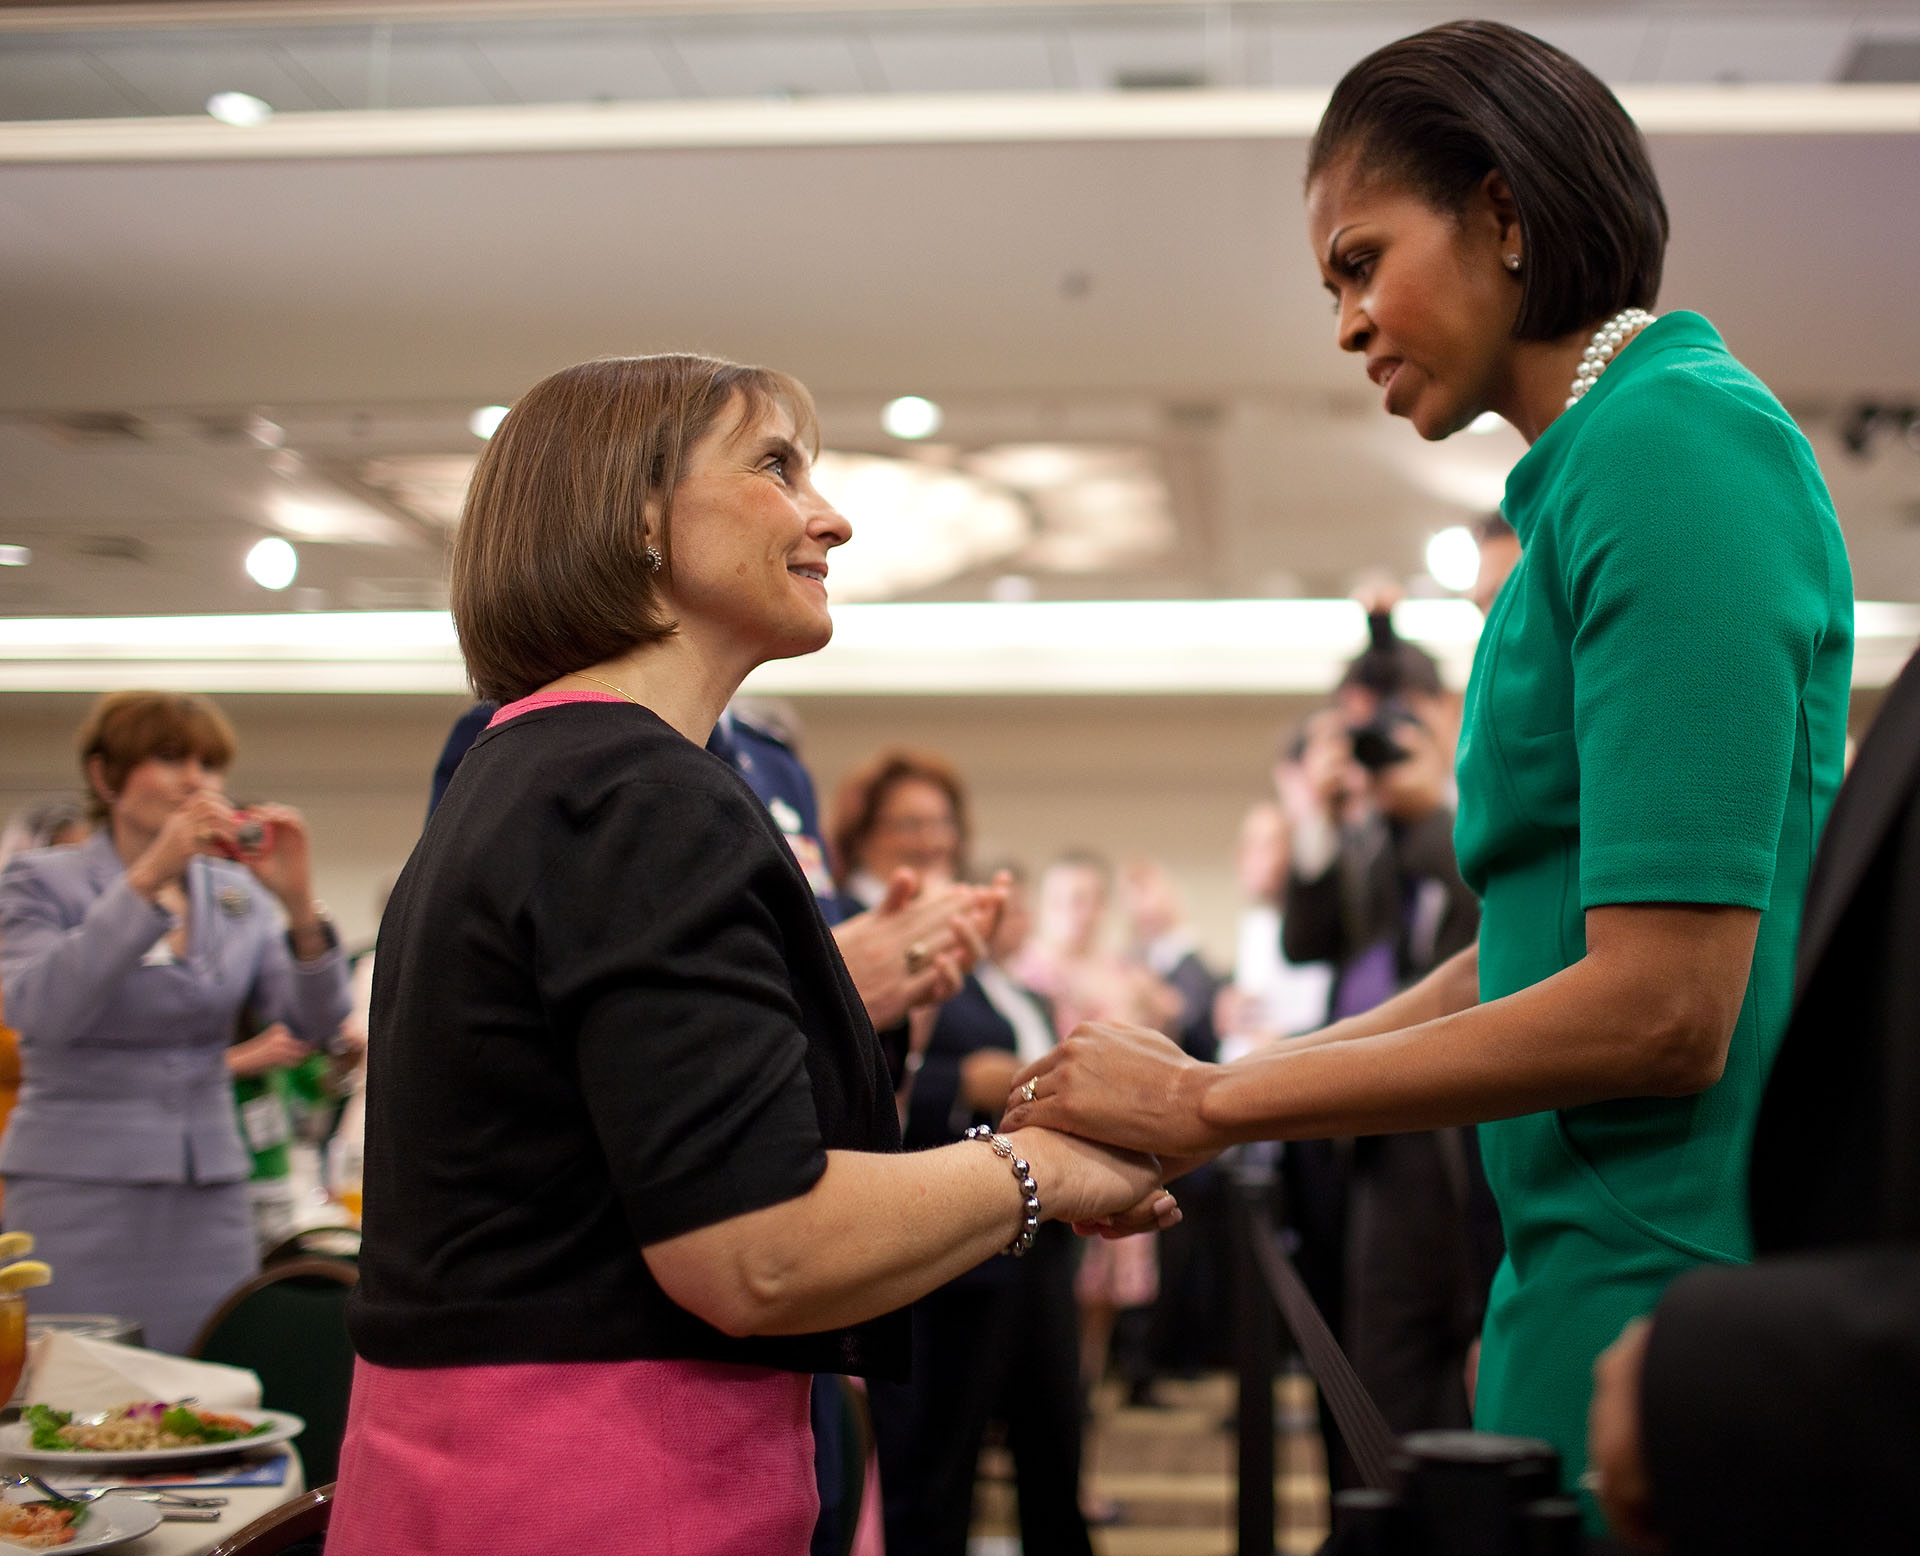 First Lady at National Military Family Association Summit 